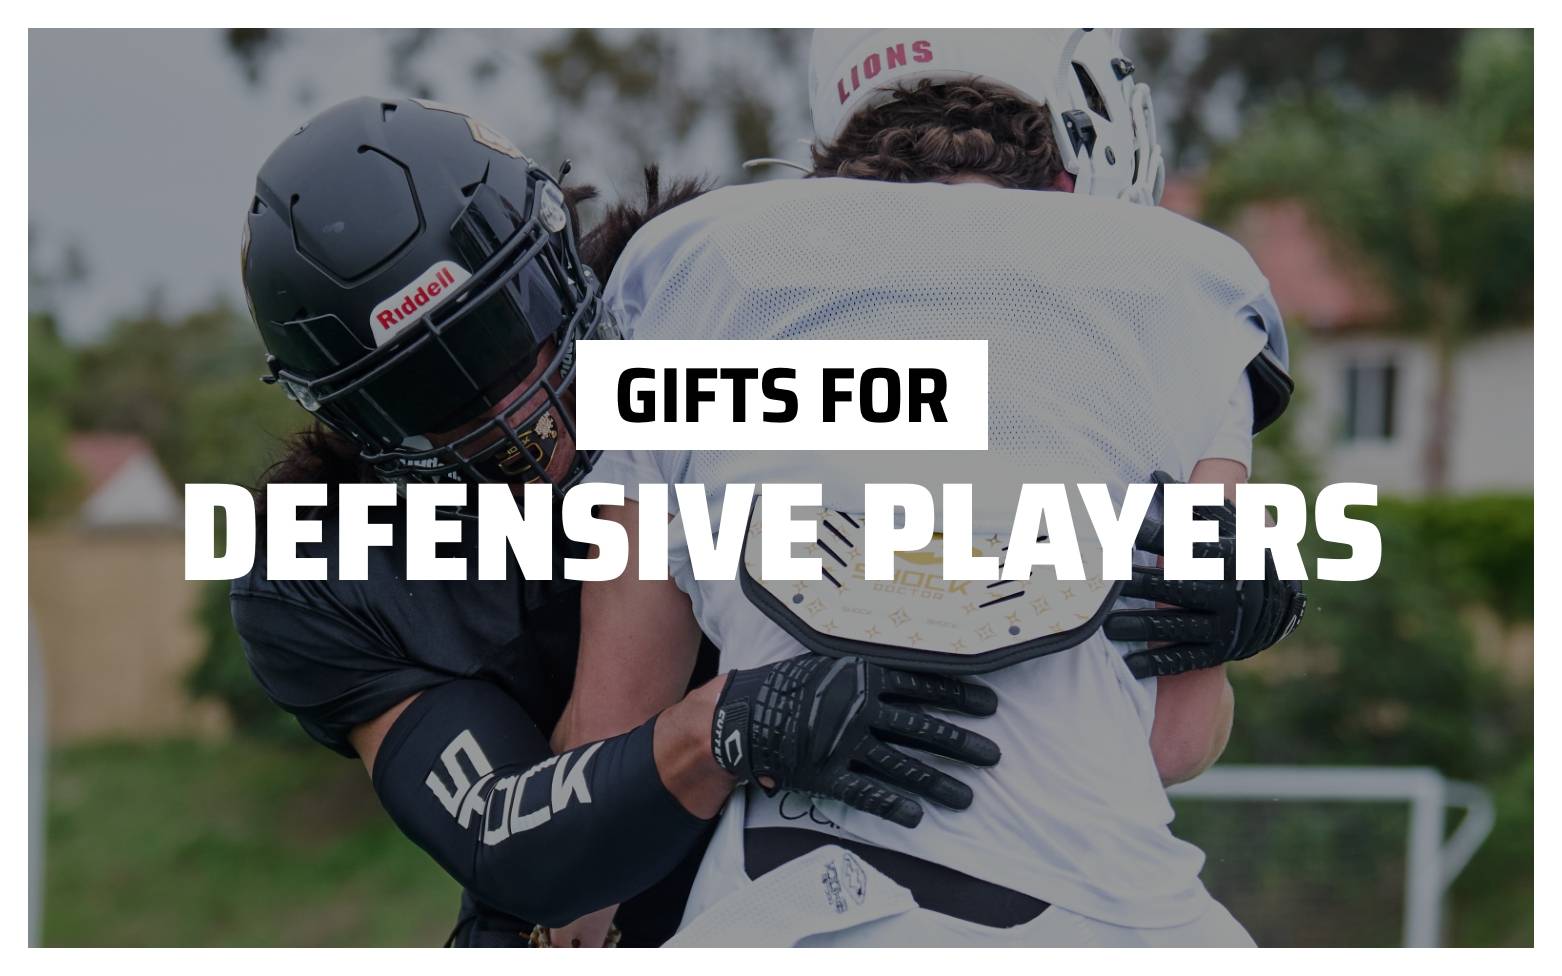 GIFTS FOR DEFENSIVE PLAYERS